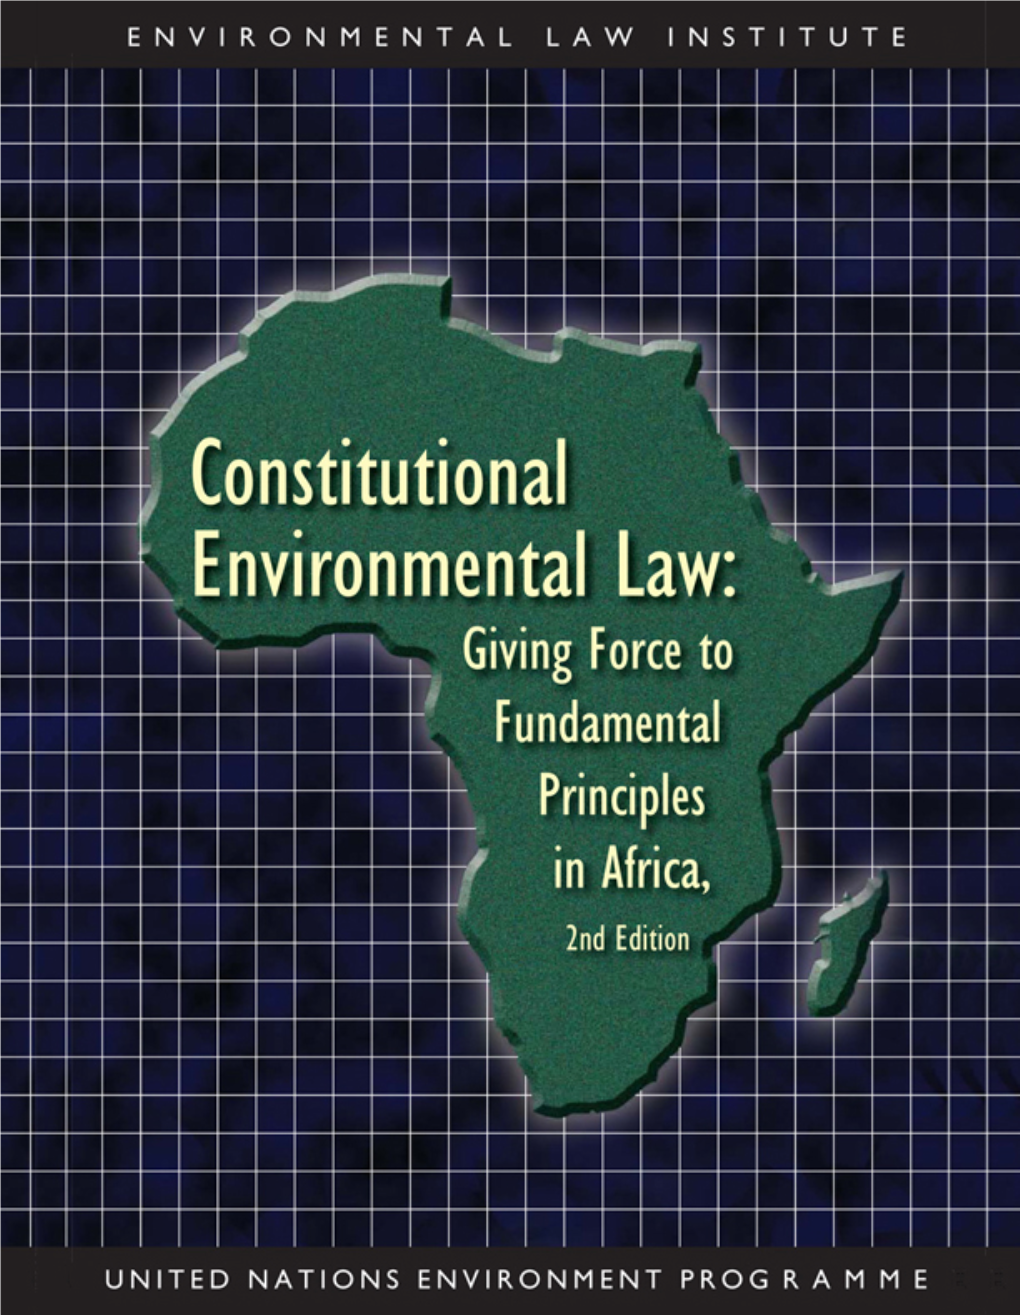 Giving Force to Fundamental Principles in Africa